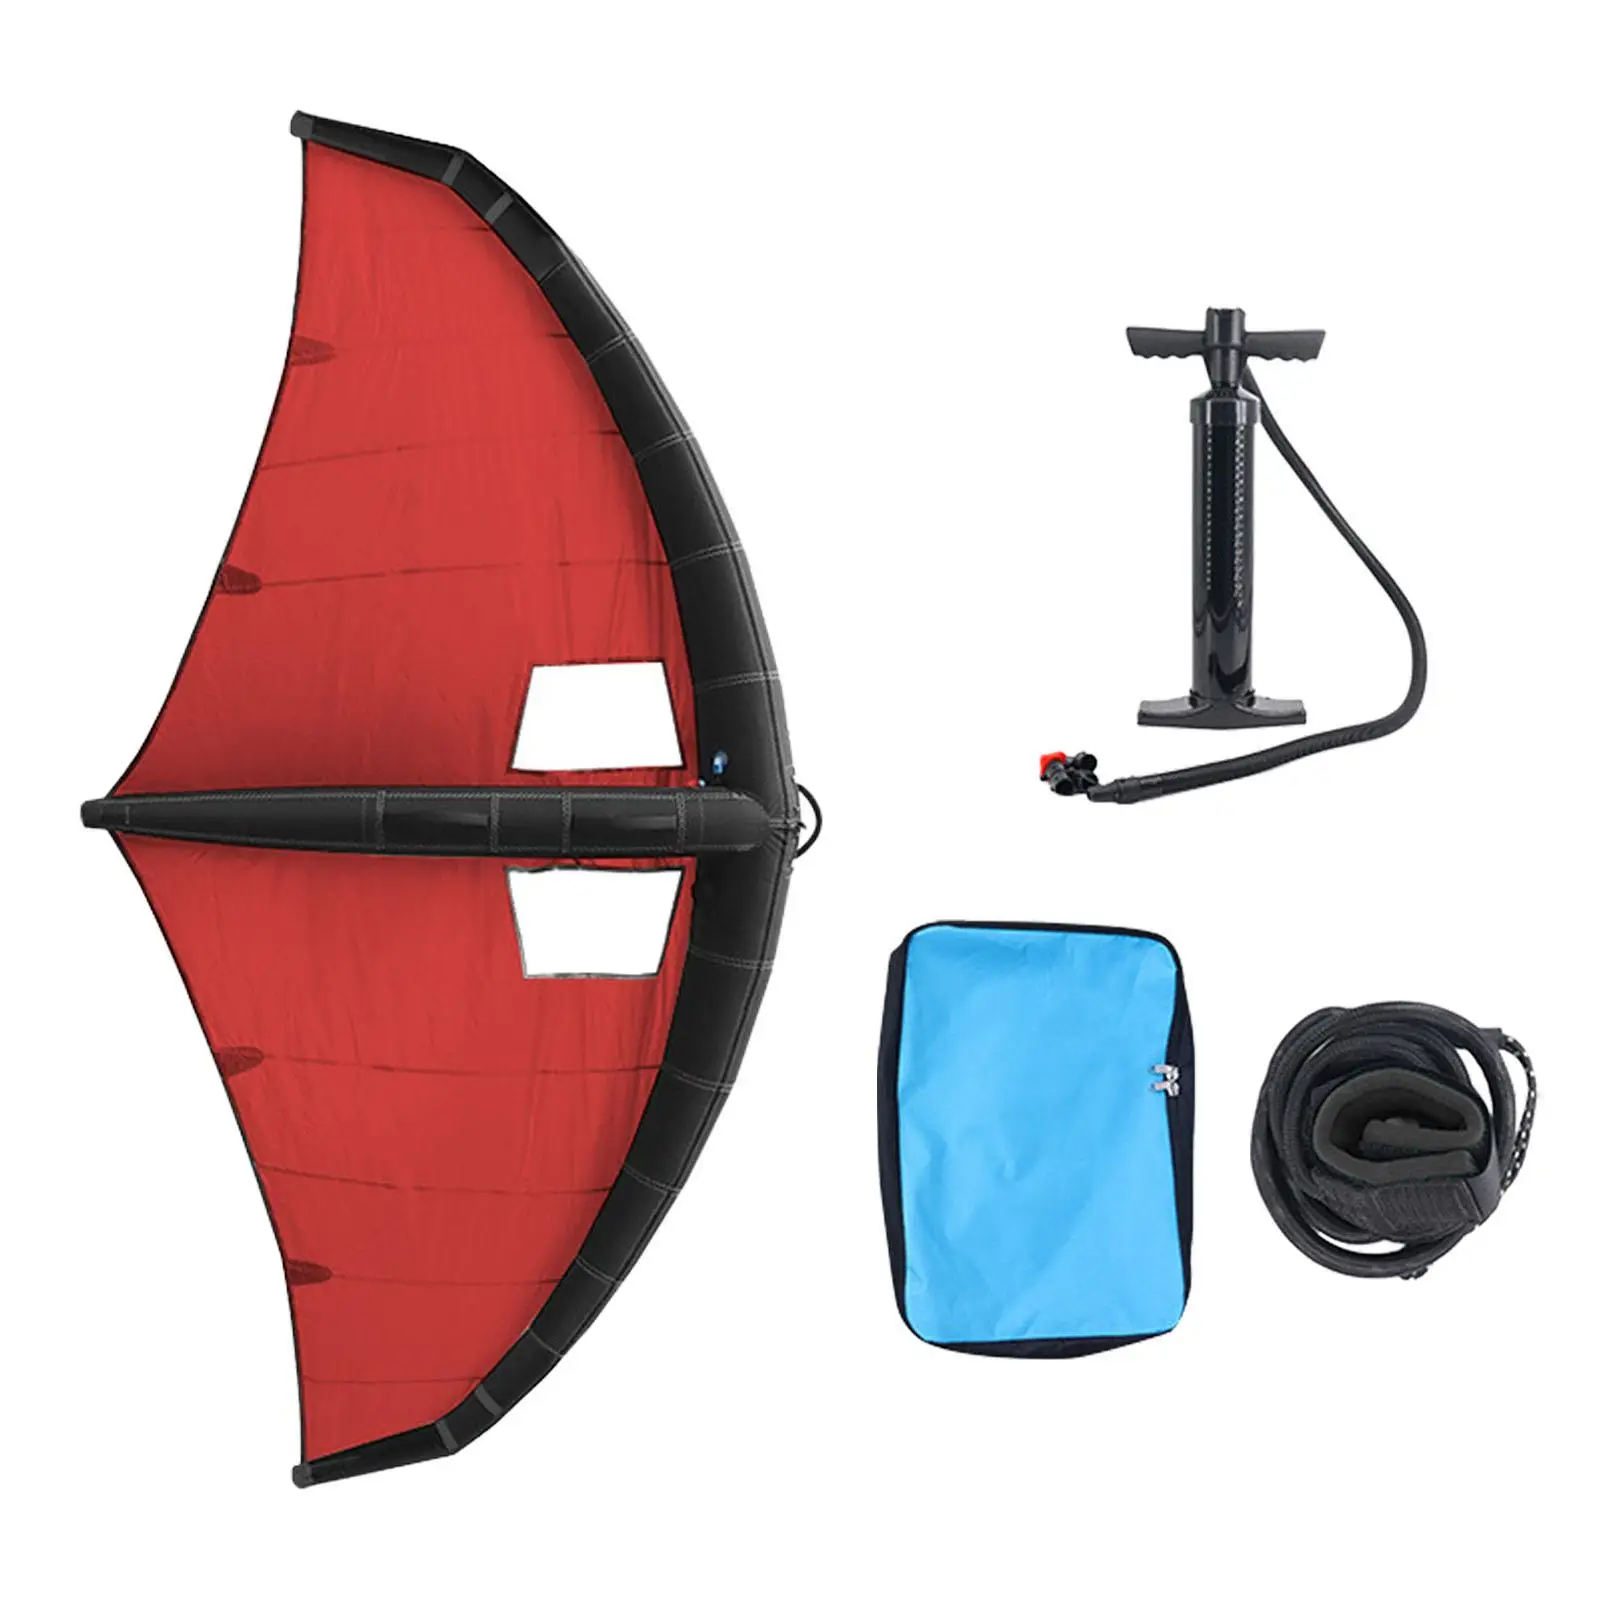 Inflatable Surfing Wing Inflatable Kite for Kitesurfing Surfing Windsurfing